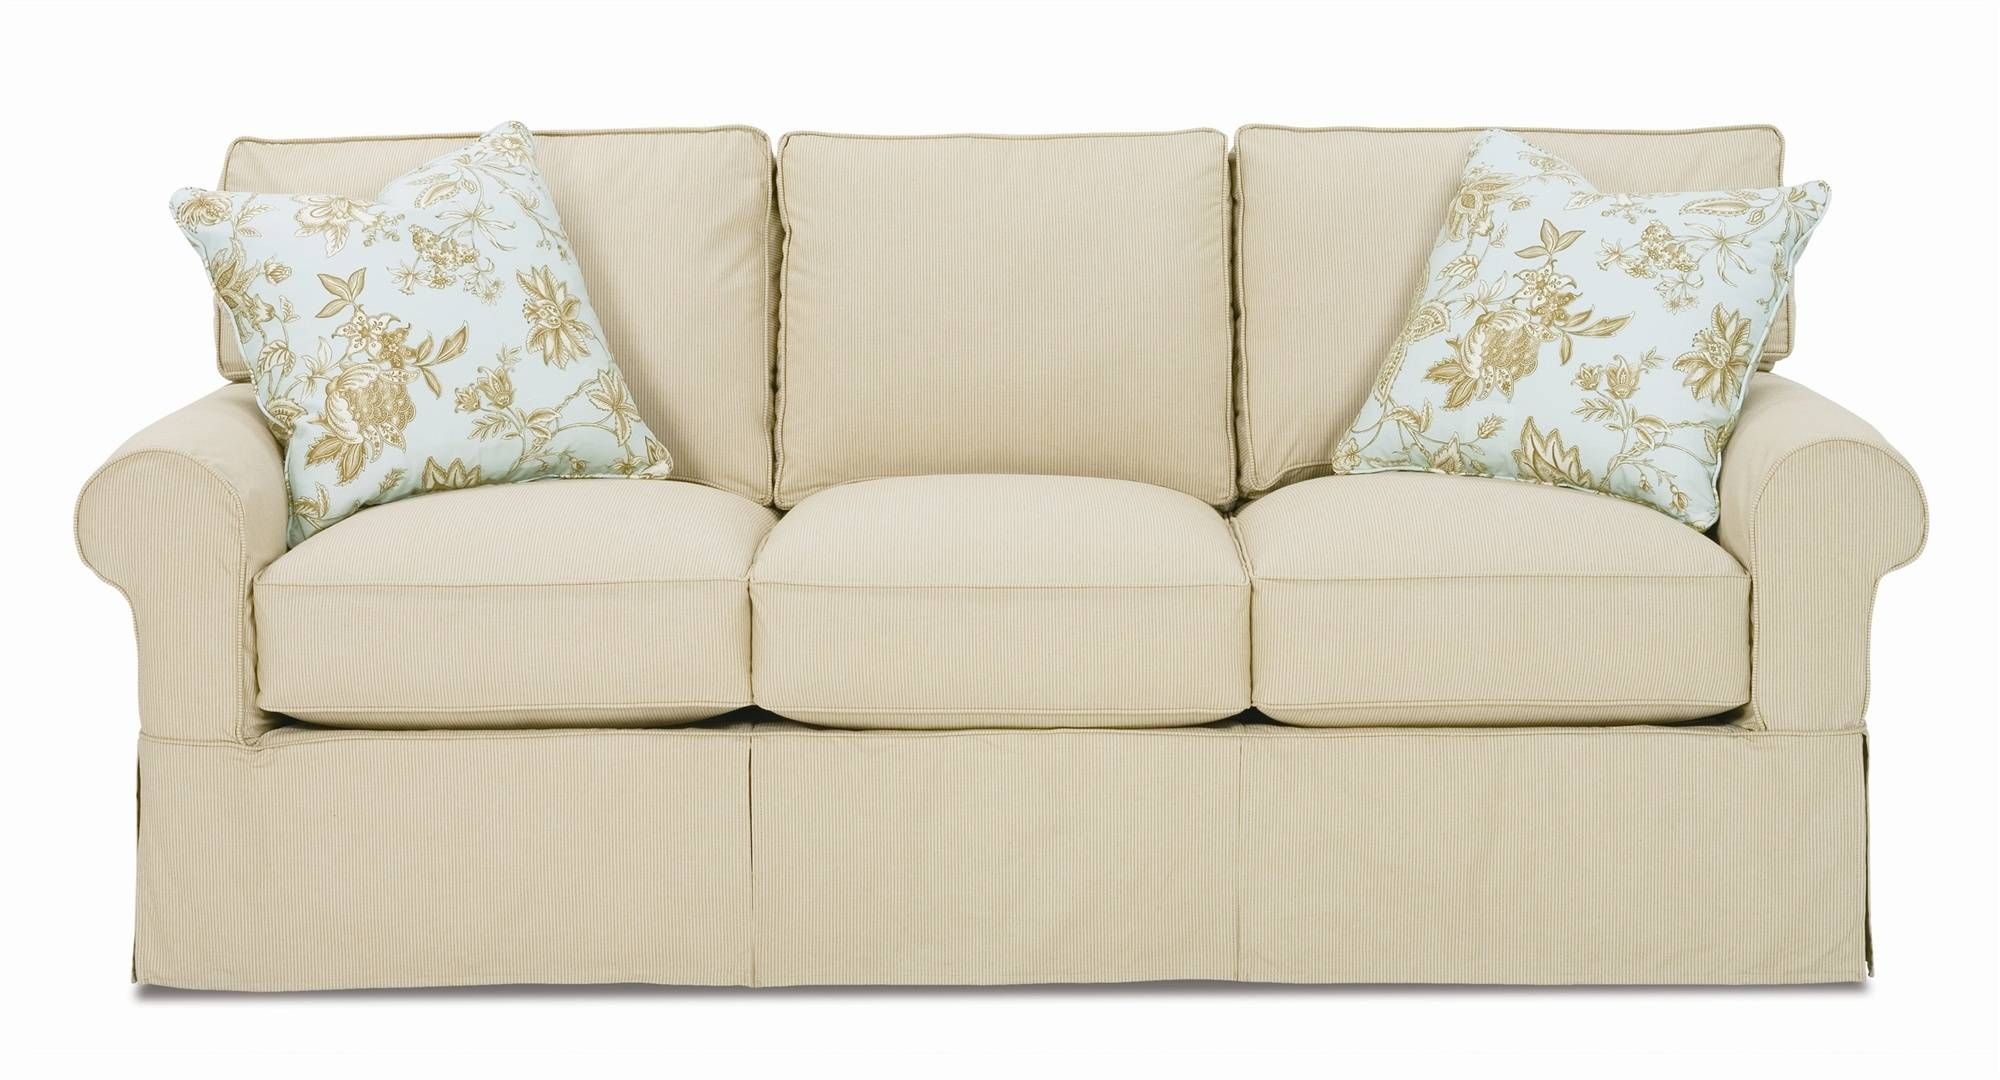 How to Choose the Right Slipcover – Makeover Your Couch in ...